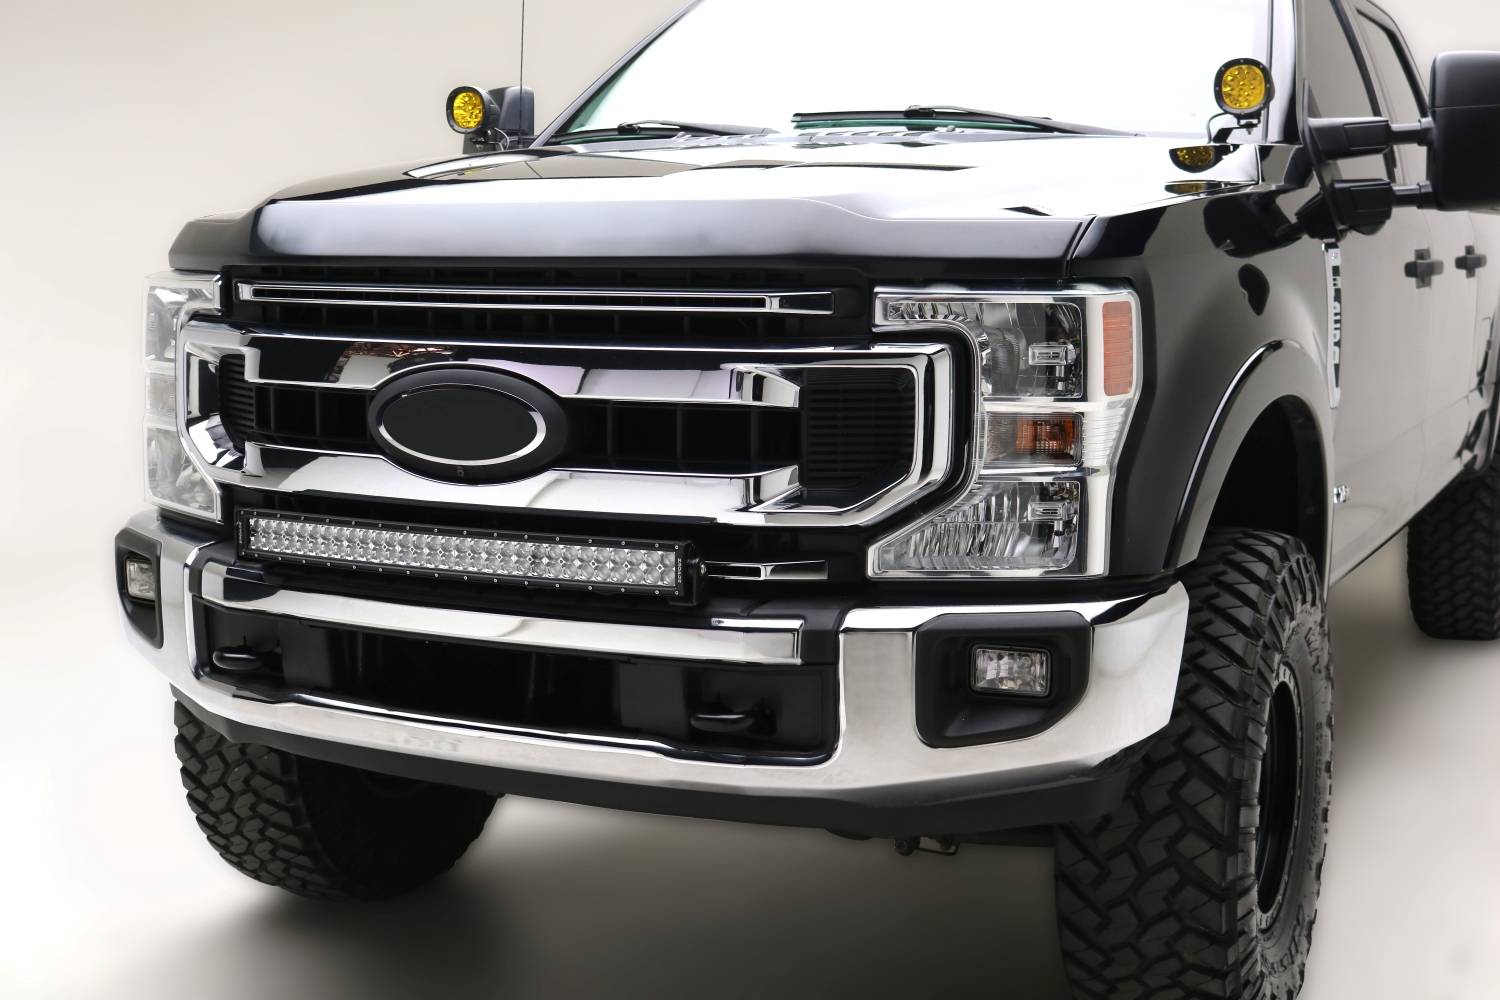 ZROADZ OFF ROAD PRODUCTS - 2020-2022 Ford Super Duty Front Bumper Top LED Kit with (1) 30-Inch ZROADZ LED Curved Double Row Light Bar - PN # Z325572-KIT